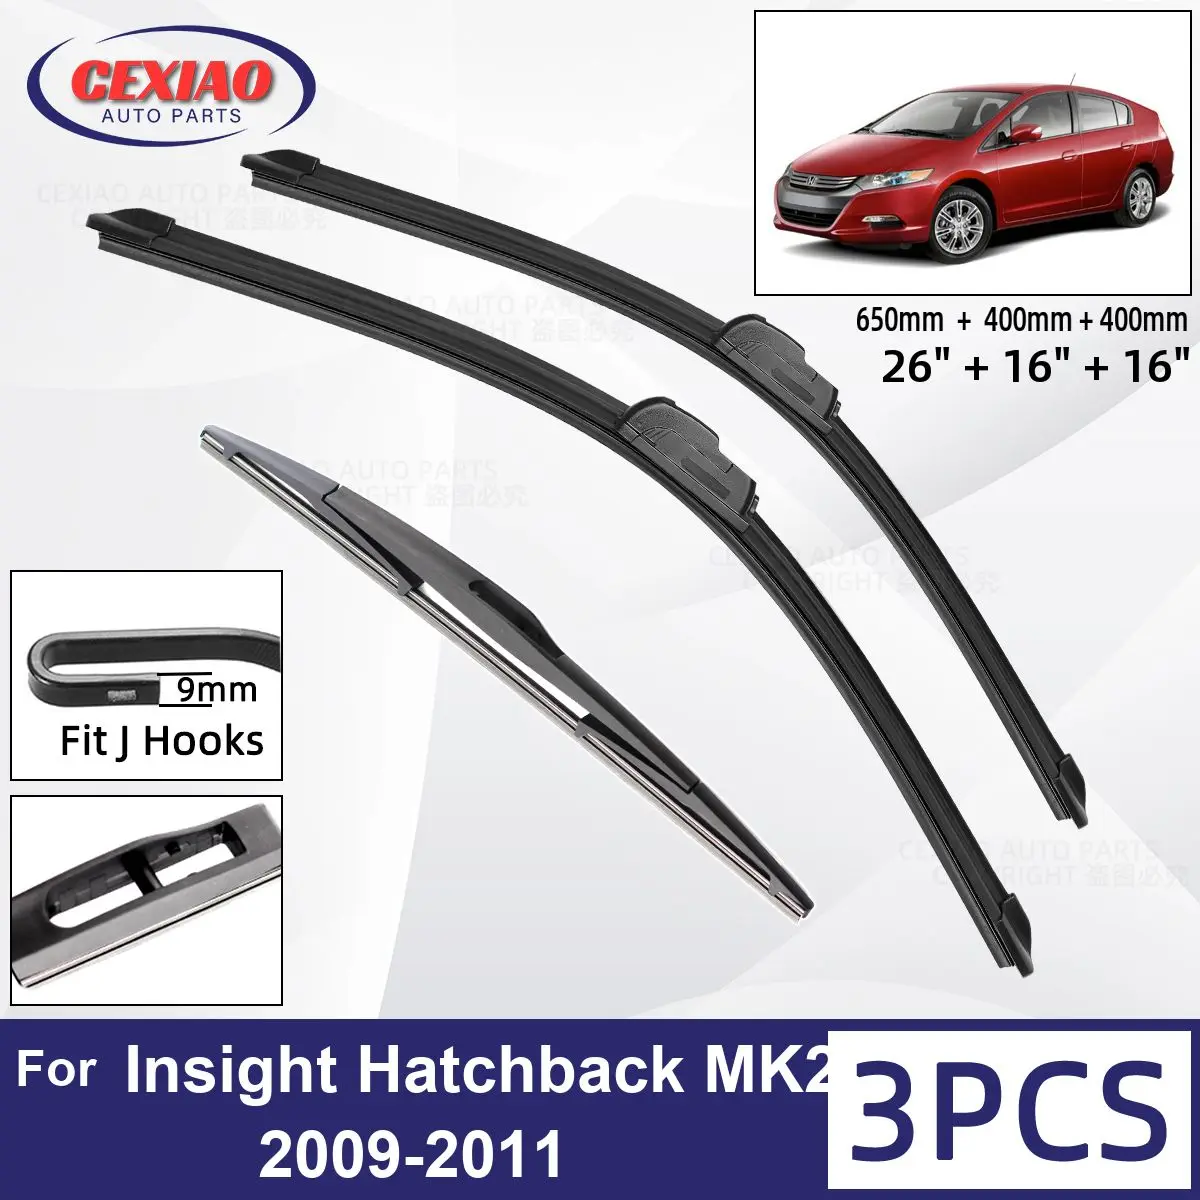 

For Honda Insight Hatchback MK2 2009-2011 Car Front Rear Wiper Blades Soft Rubber Windscreen Wipers Auto Windshield 26"+16"+16"